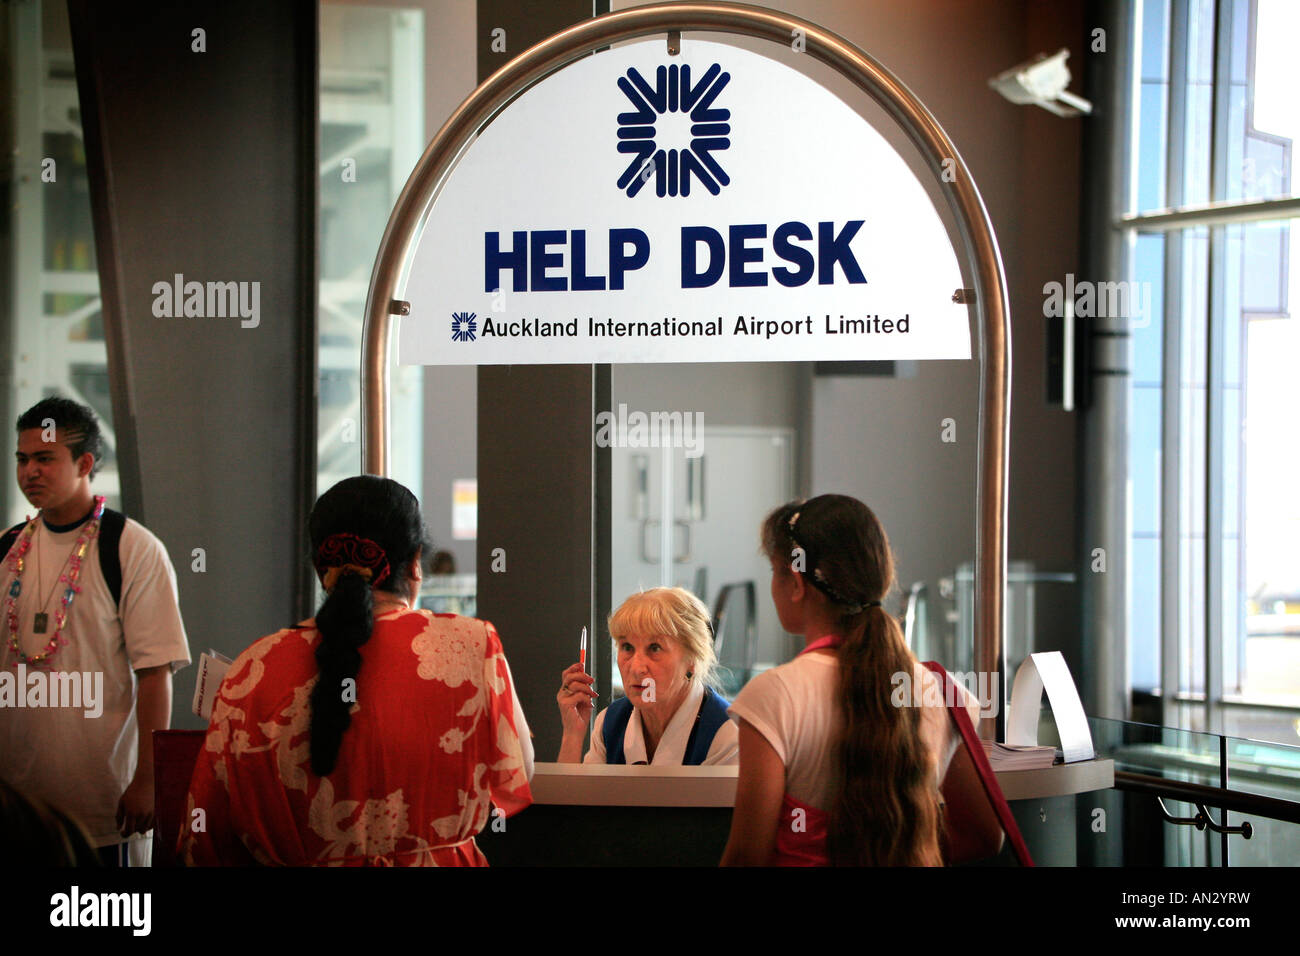 Help Desk For Travelers At Auckland International Airport Stock